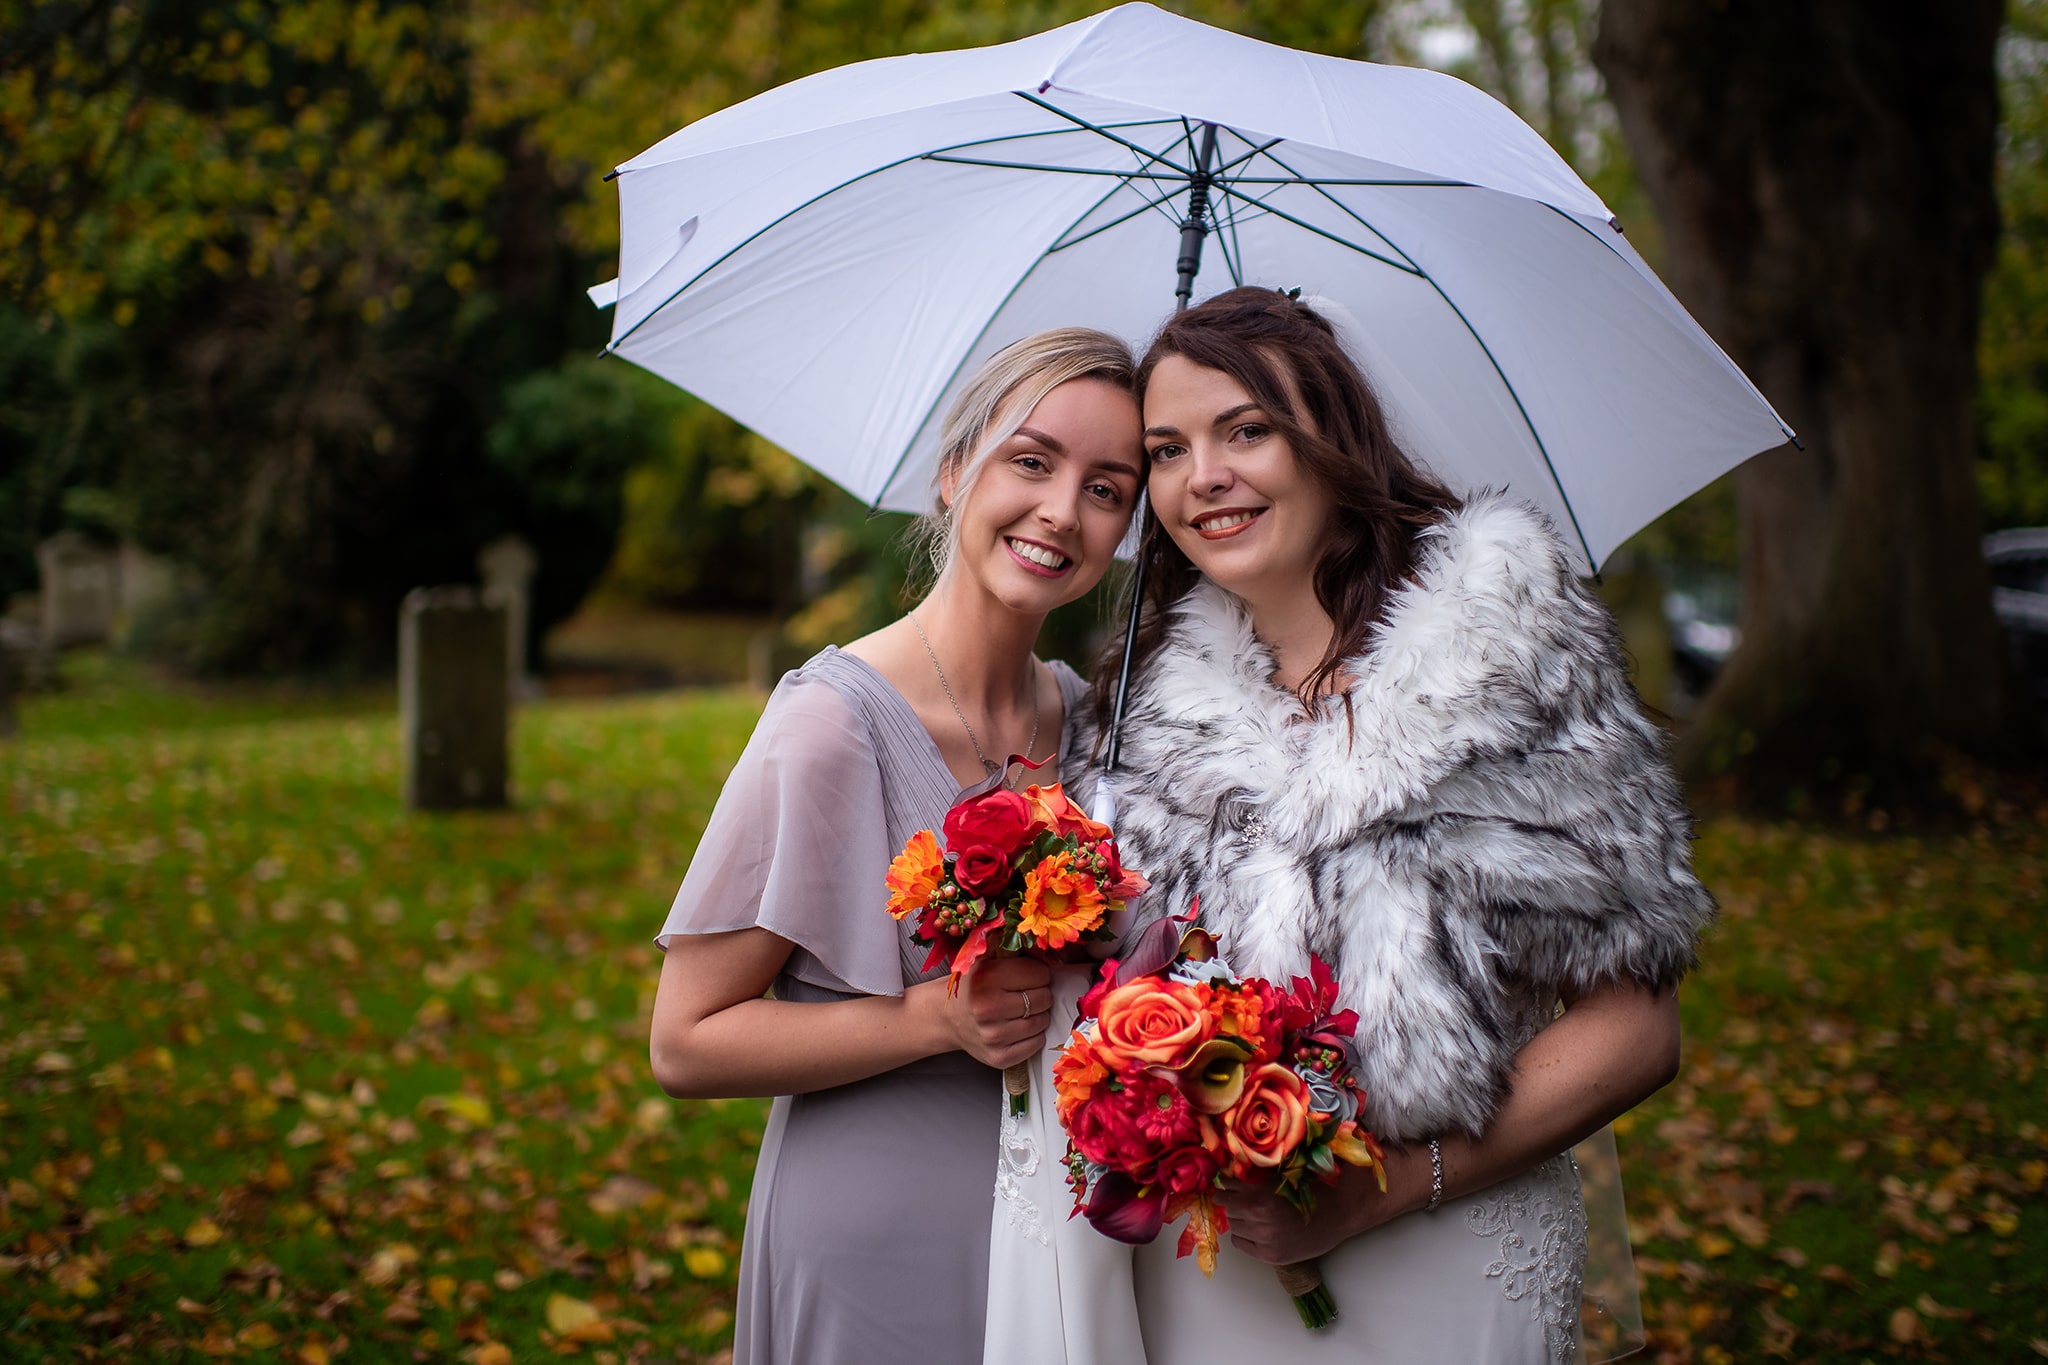 Bride & Bridesmaid sharing white umbrella, smiling and standing in church yard holding Autumn flower bouquets